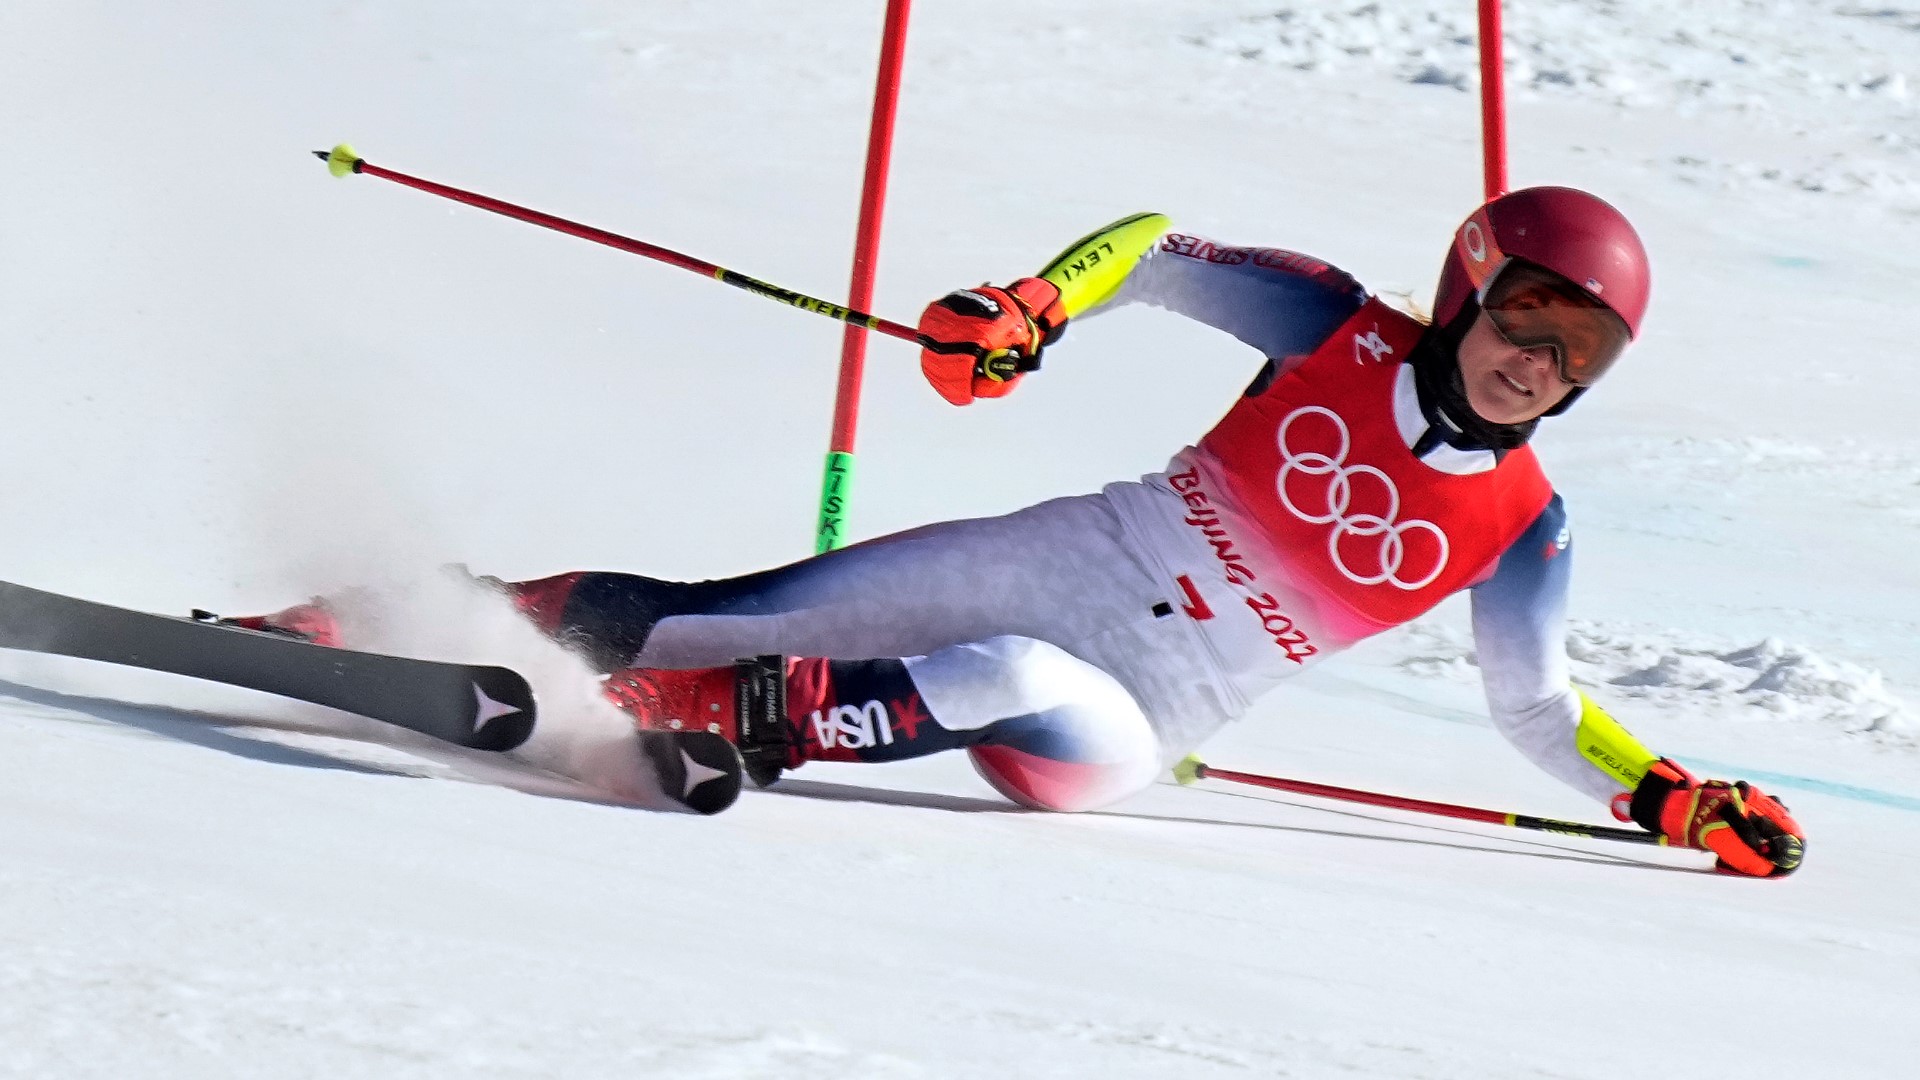 The 26-year-old Shiffrin still could have a handful of chances over the next two weeks.